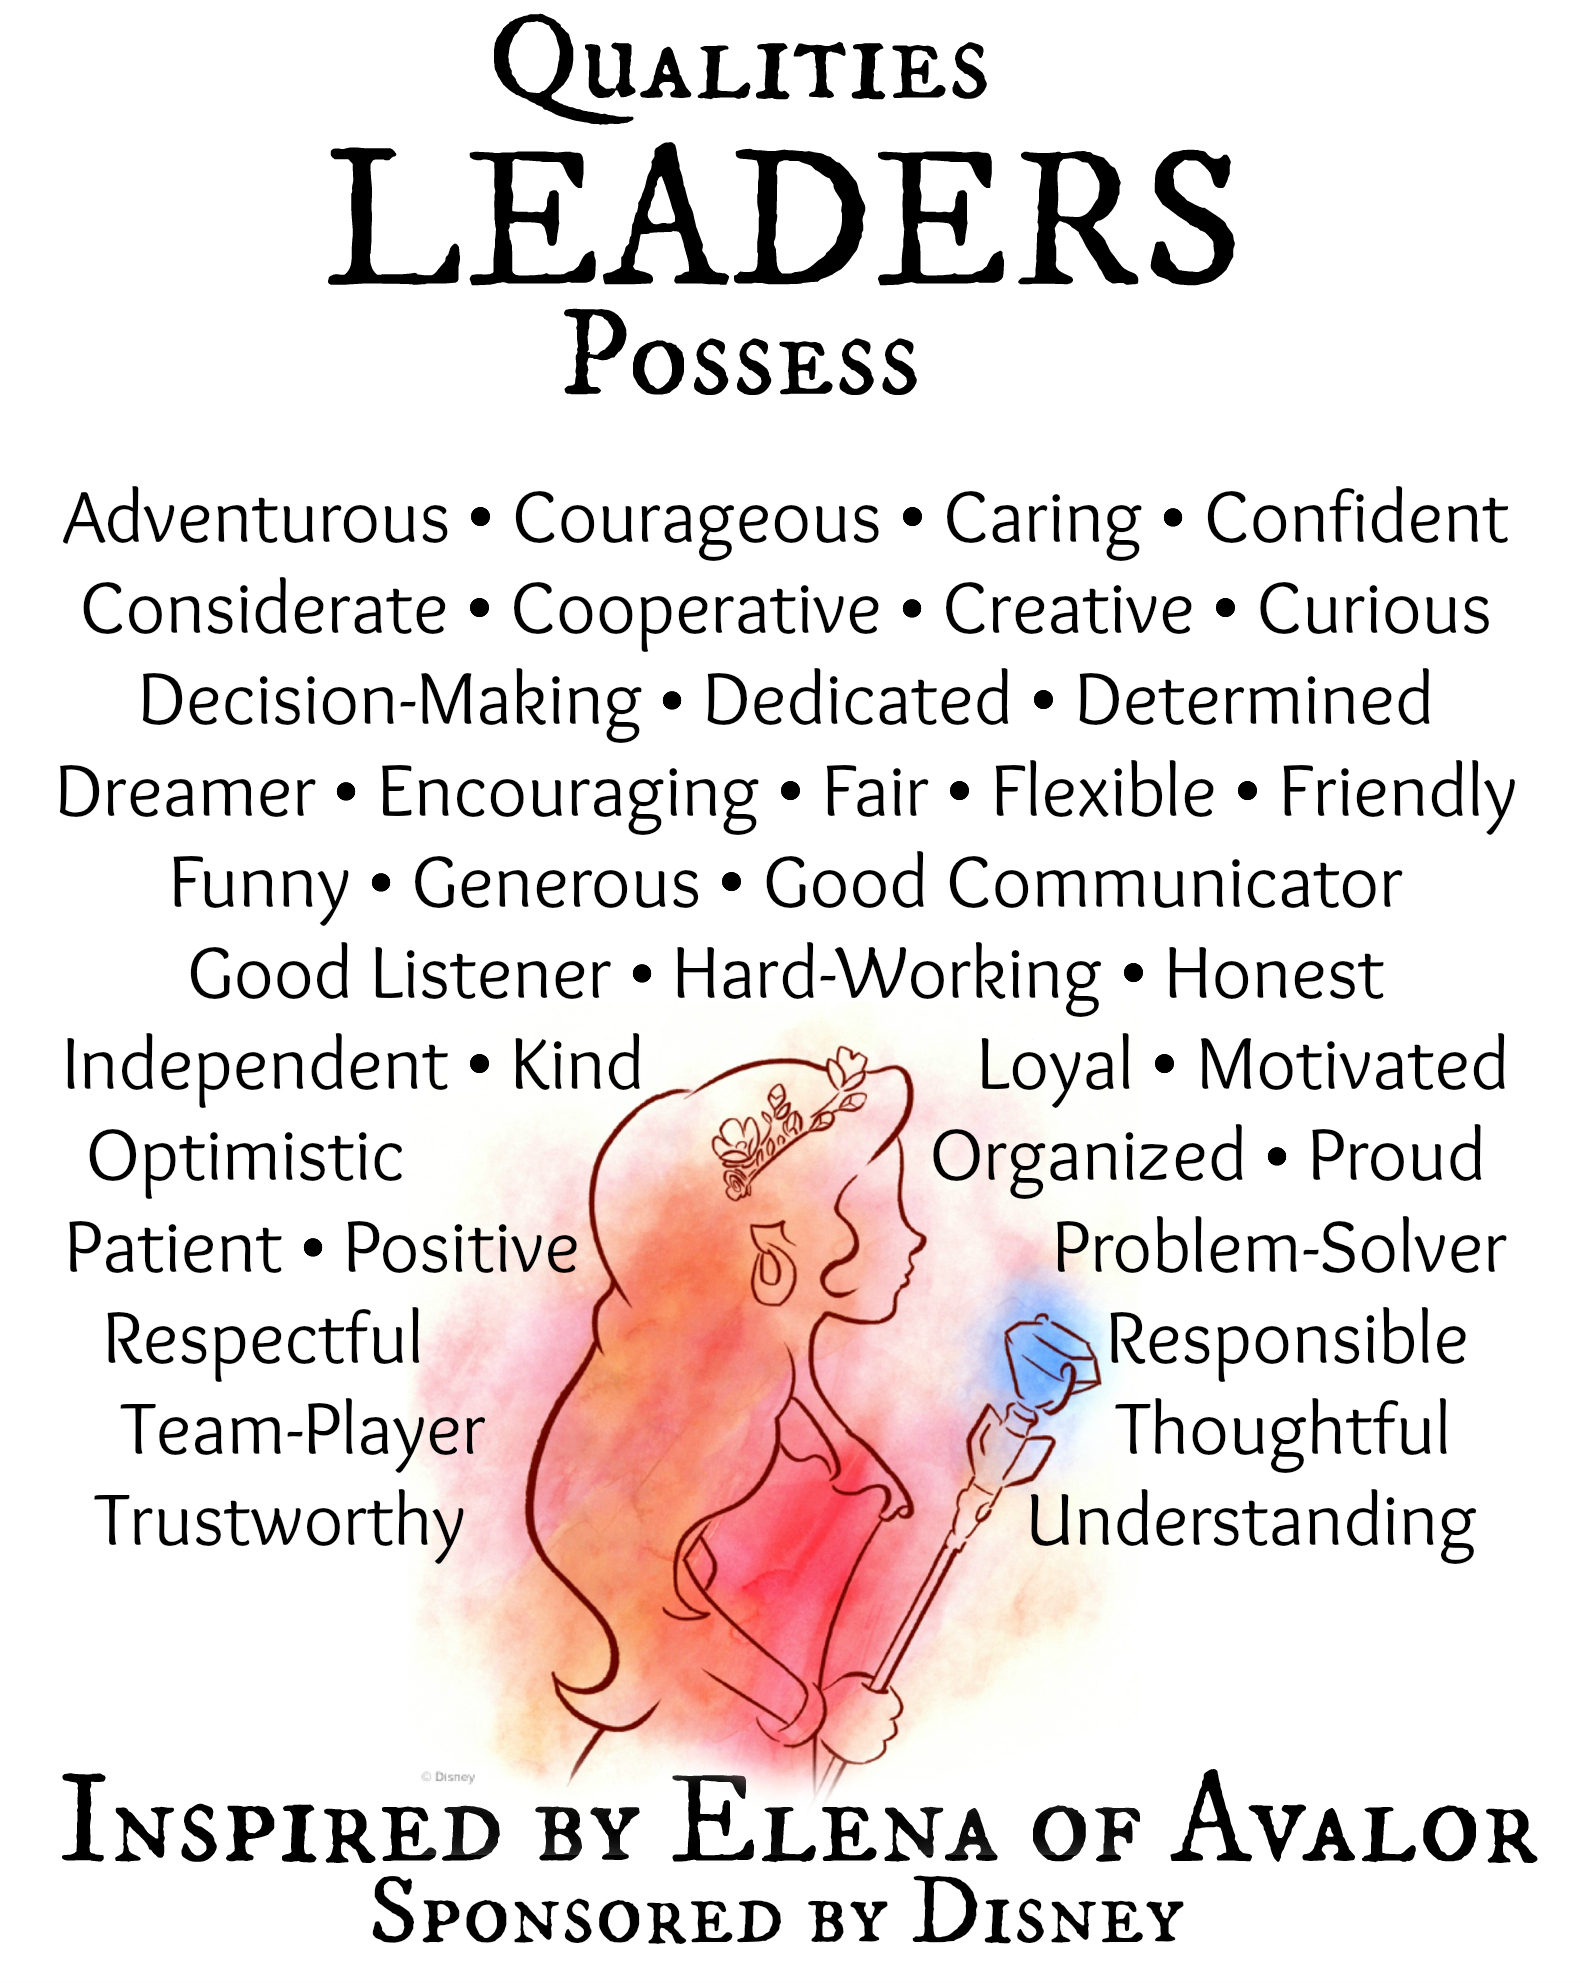 Leadership Qualities Inspired by Elena of Avalor